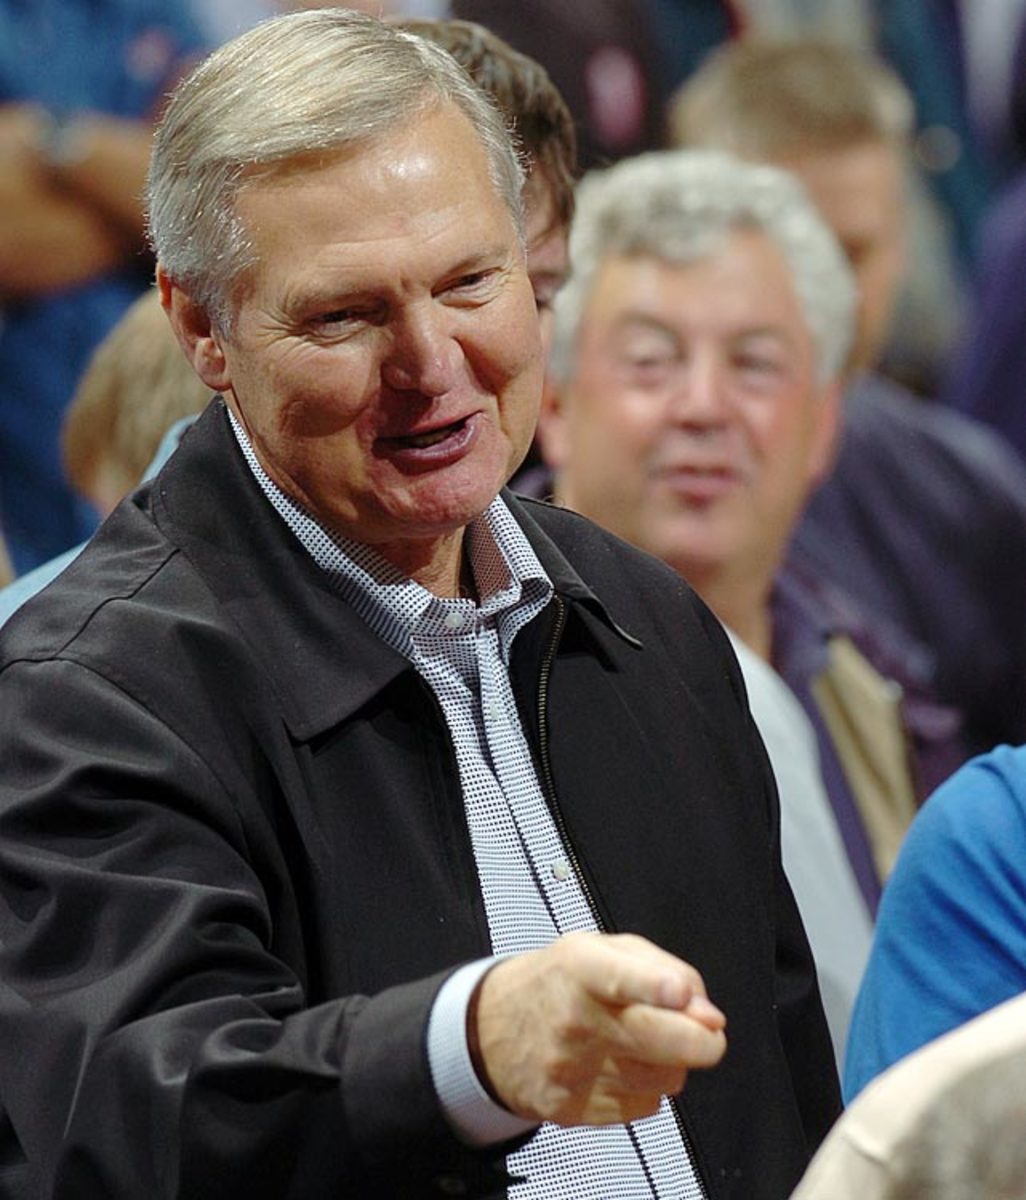 Jerry West's lifelong pursuit for love and respect